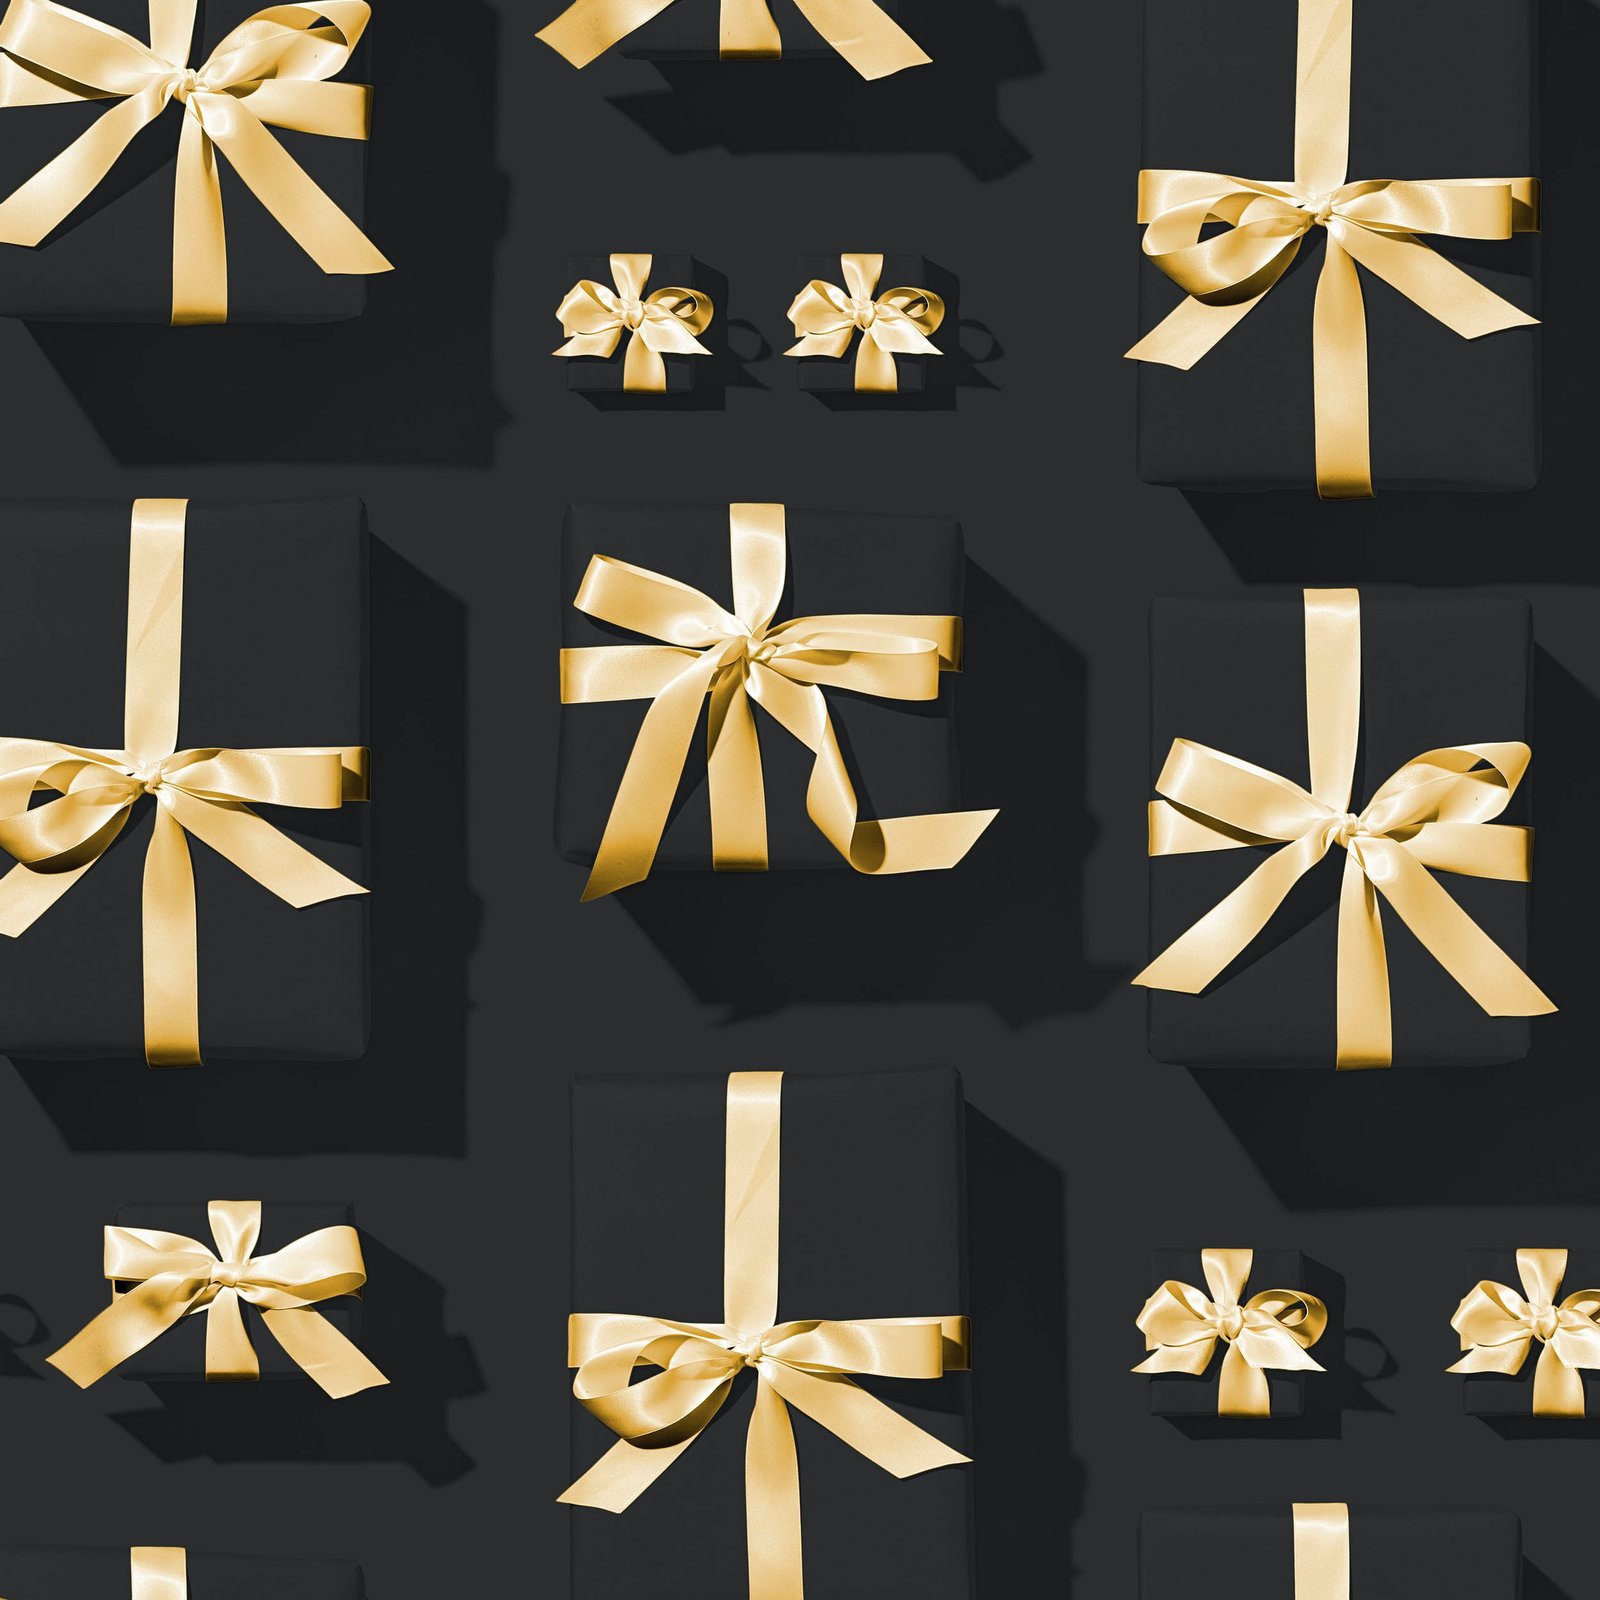 Corporate Gifts for Clients: The Beginner's Guide